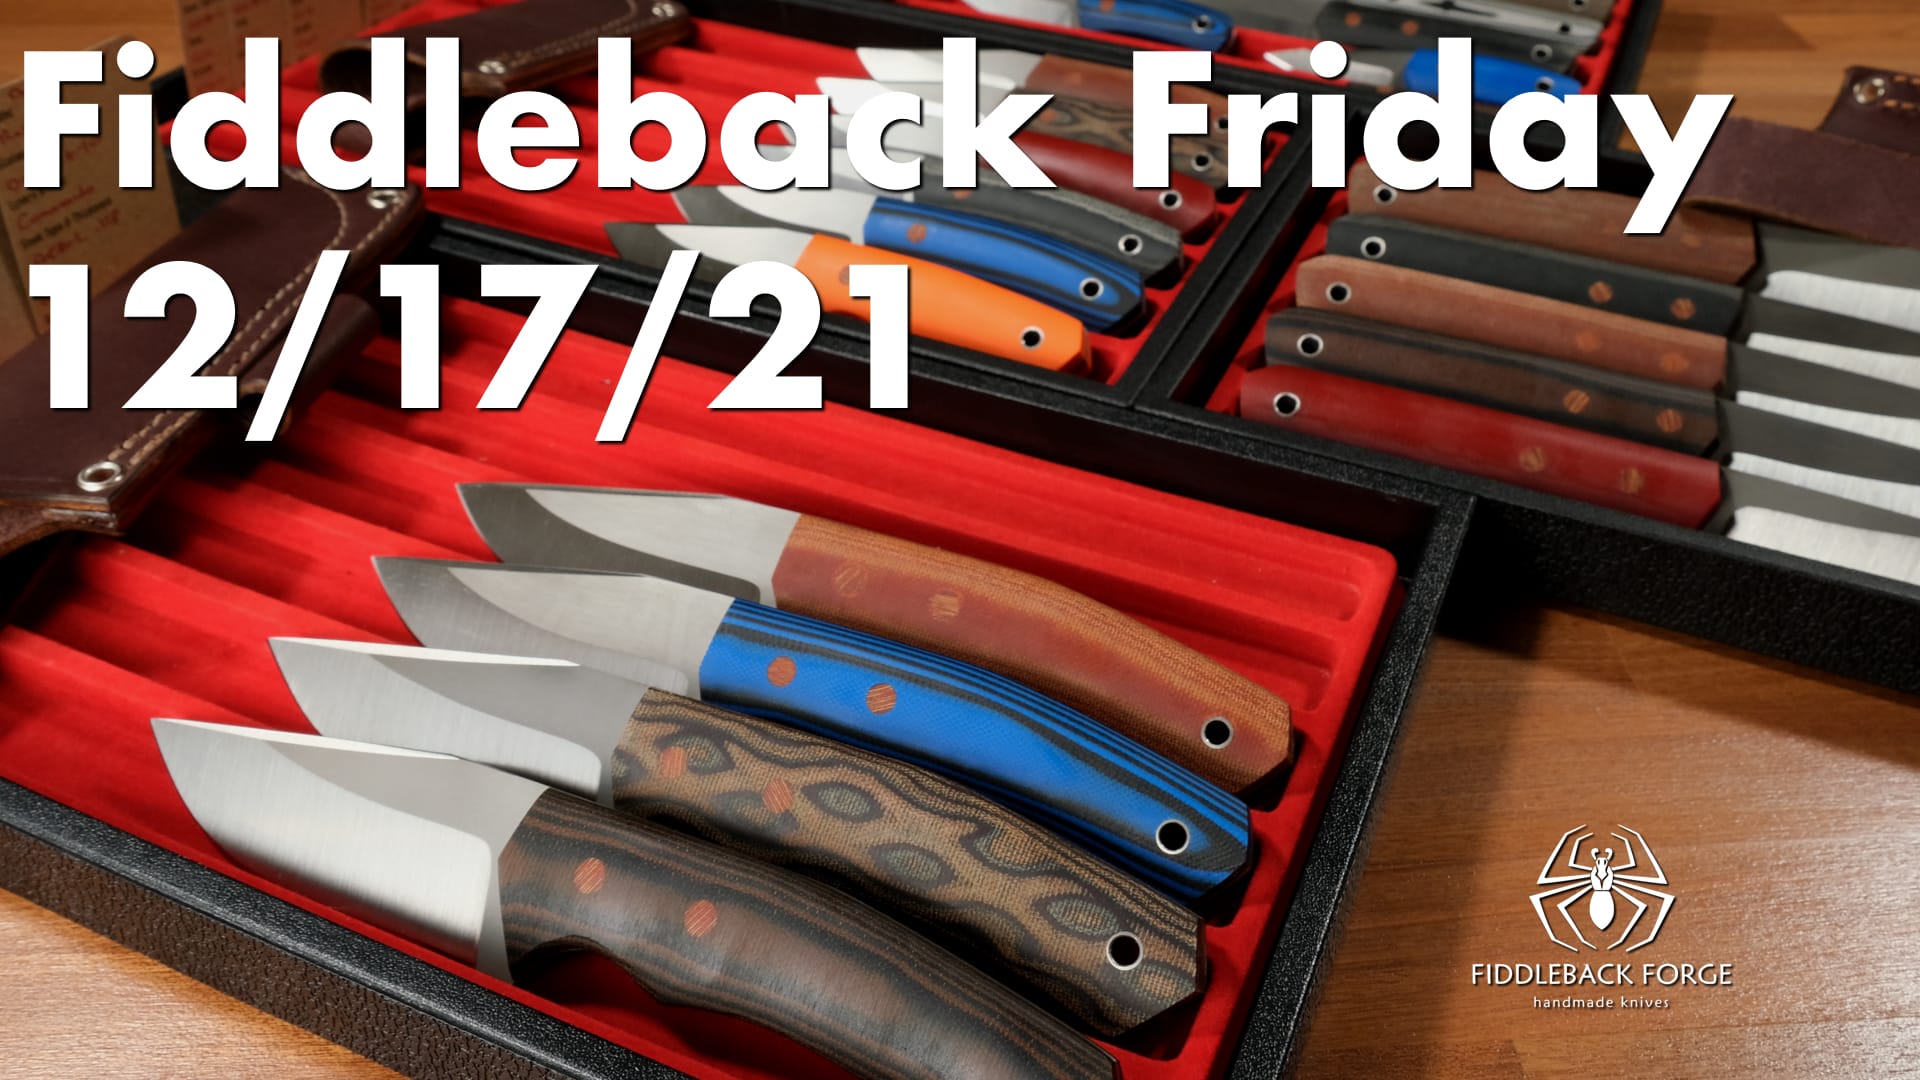 Fiddleback Friday 12/17/21 - Video Preview